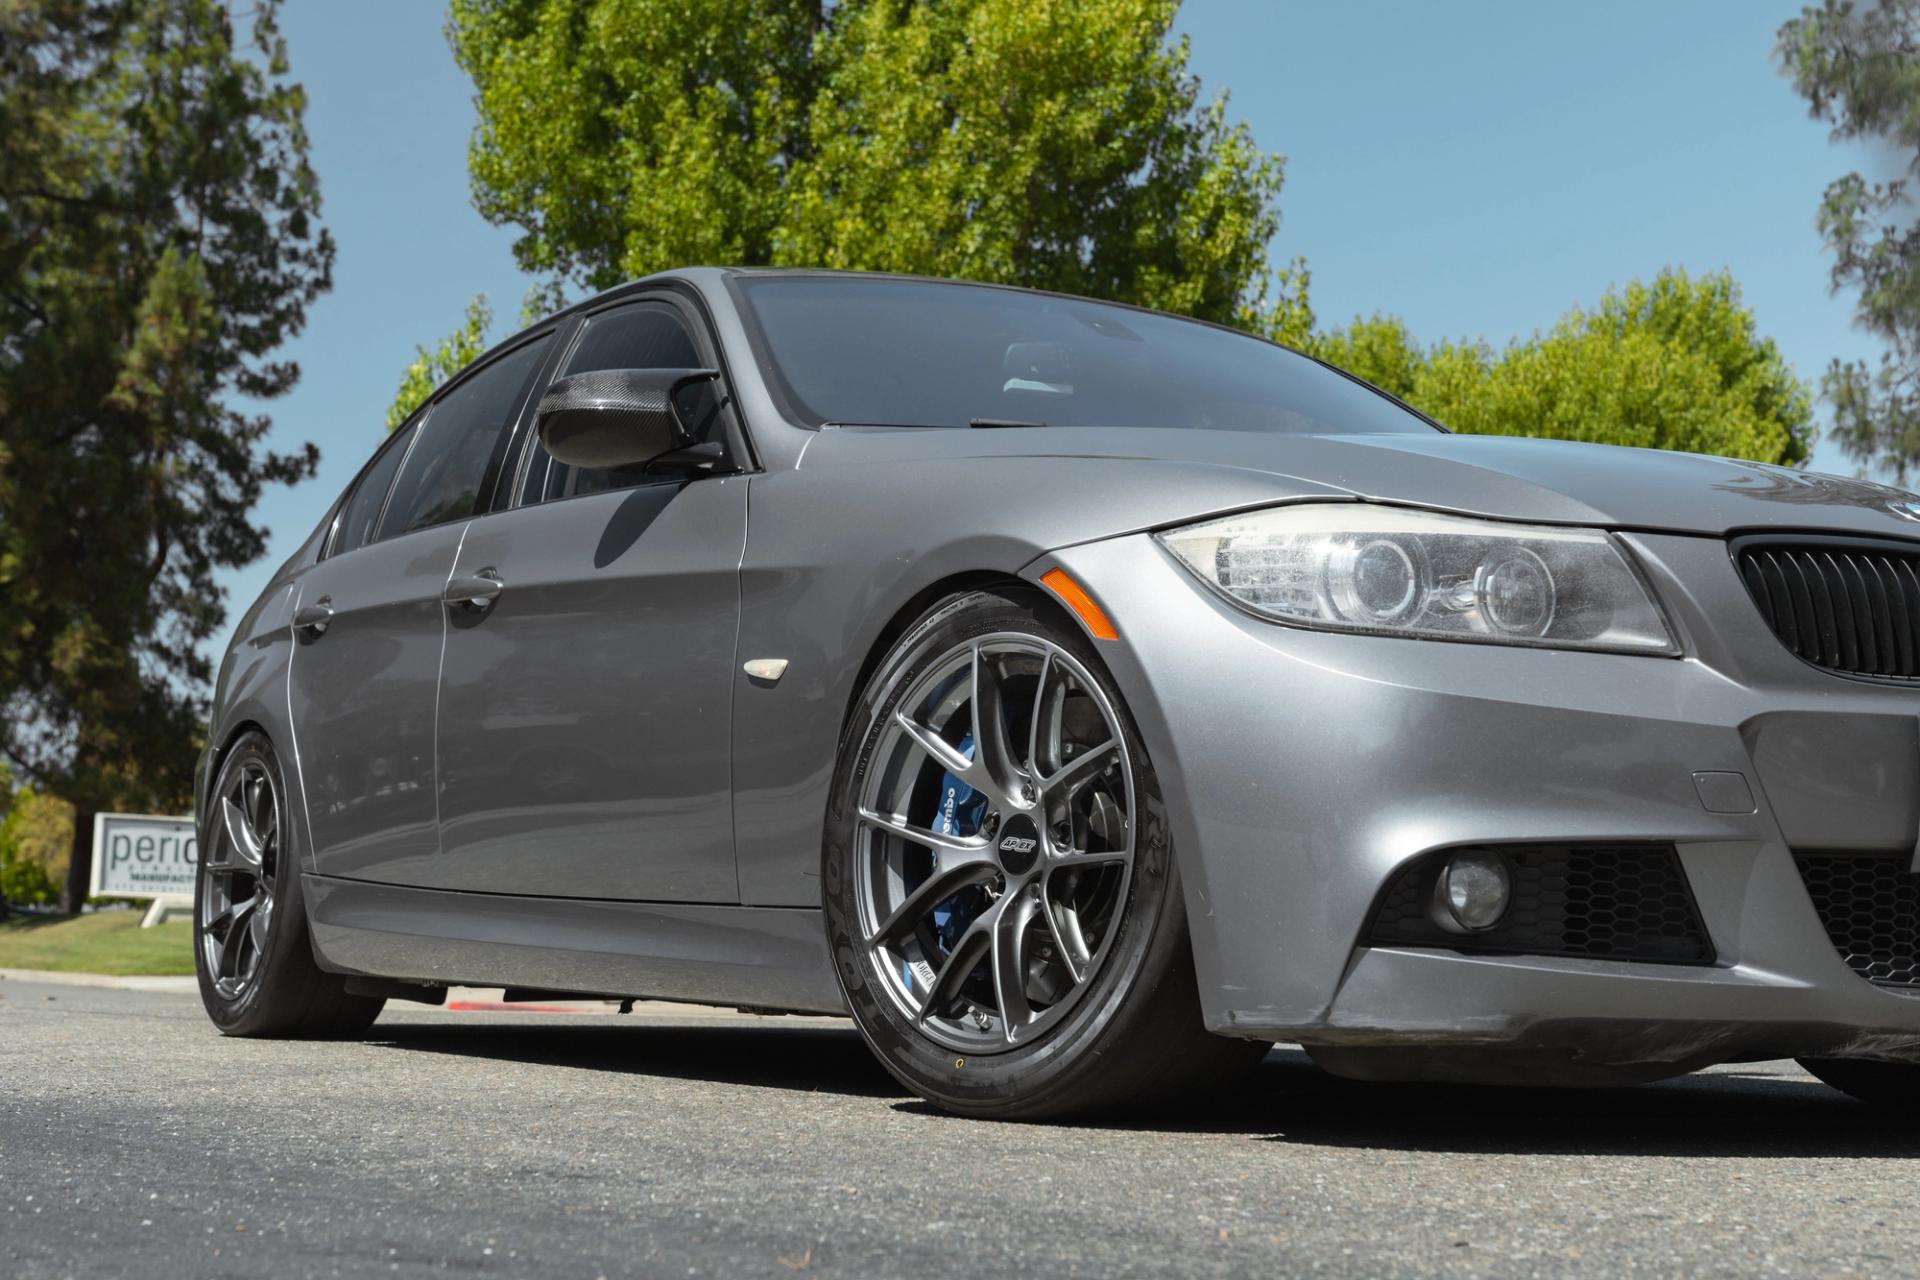 BMW E90 LCI Sedan 3 Series with 17" VS-5RS in Anthracite